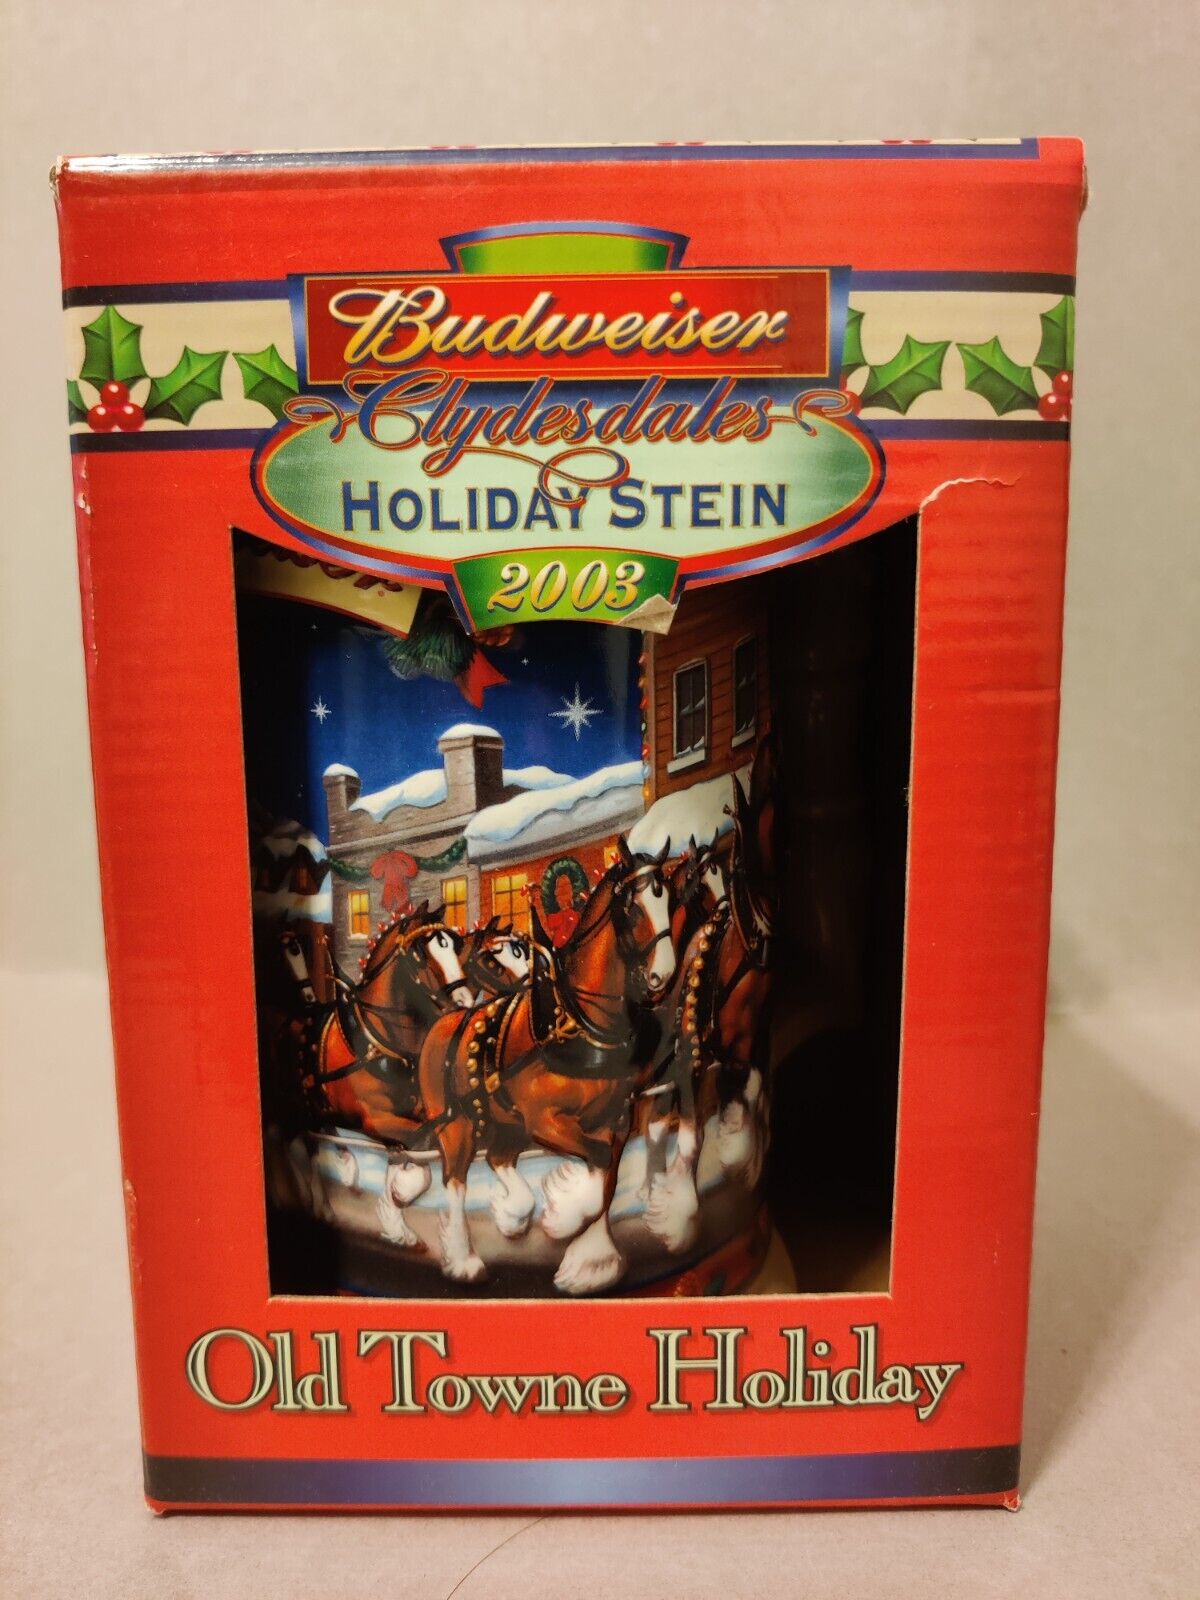 MINT 2003 Budweiser Holiday Stein “Olde Town Holiday” Original Box Vintage w COA